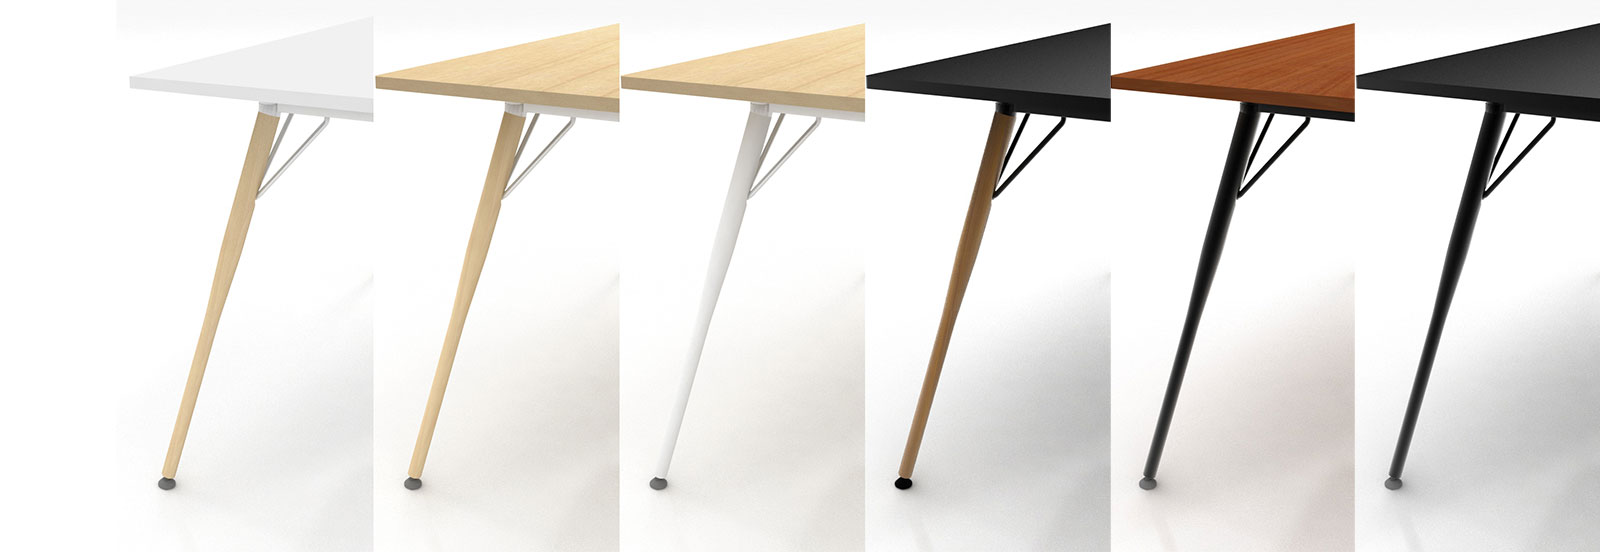 Forum tables in different wood and leg finishes